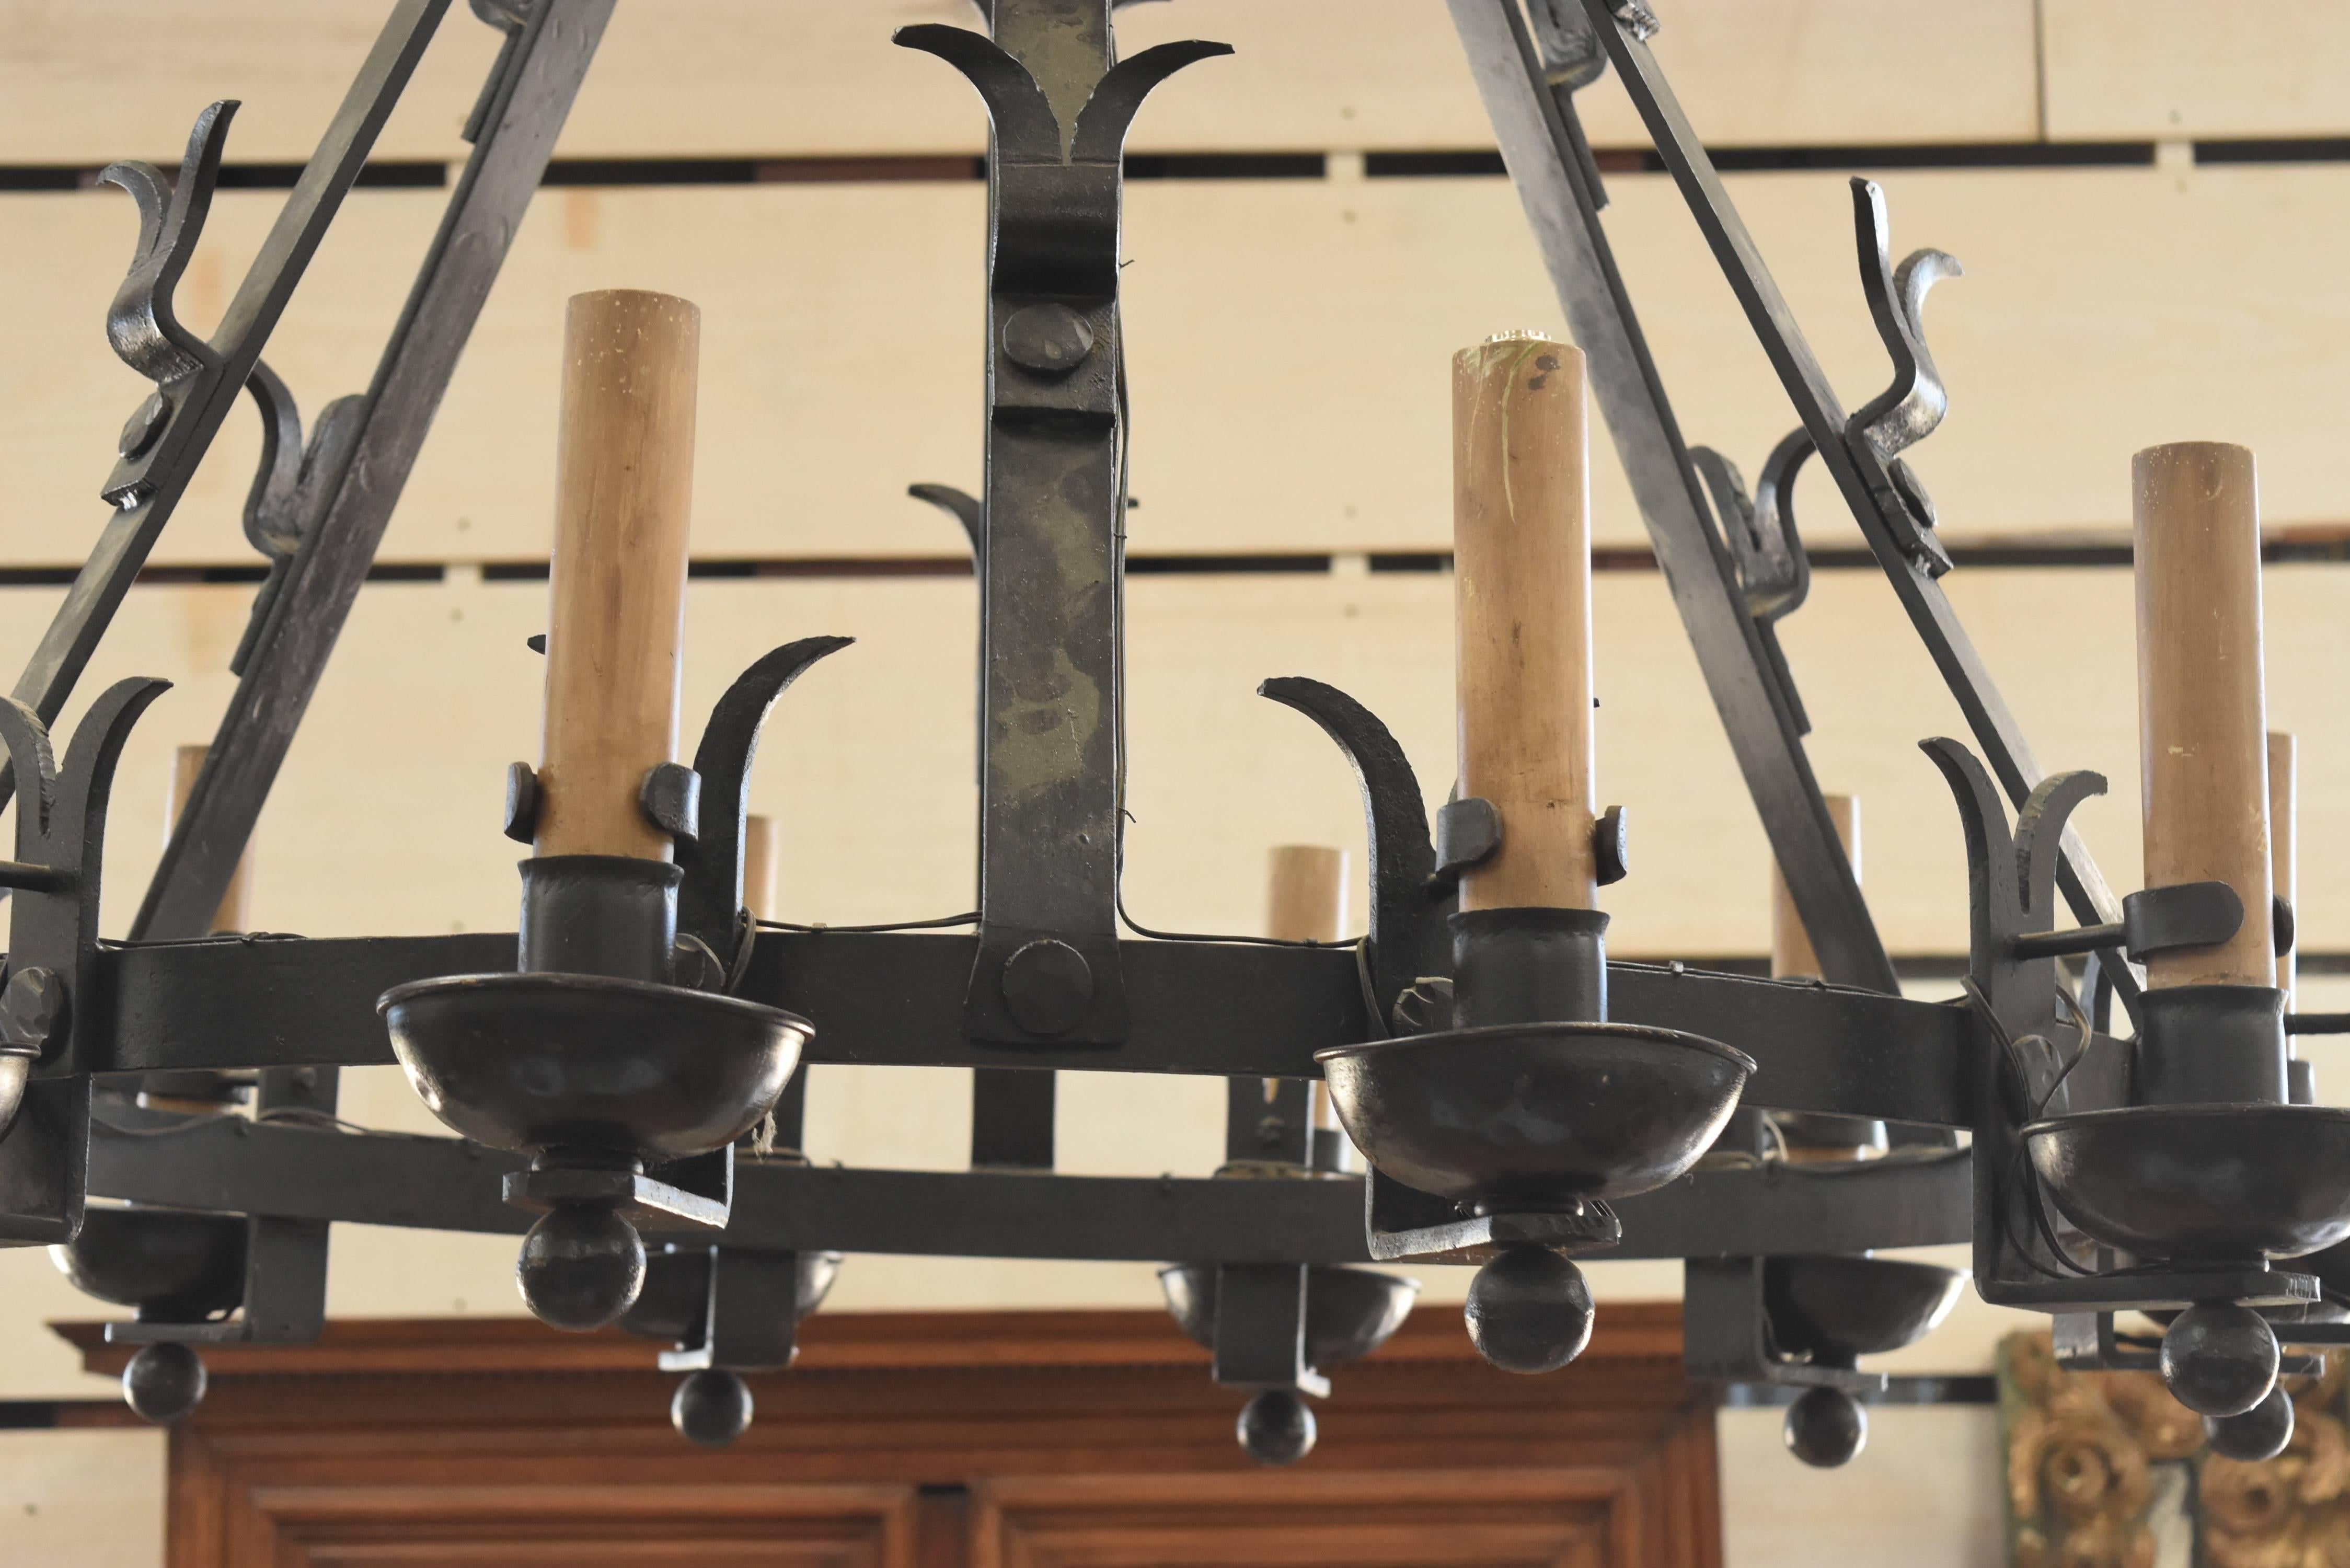 Spanish Imported 19th Century Wrought Iron Chandelier from Spain with 12 Arms